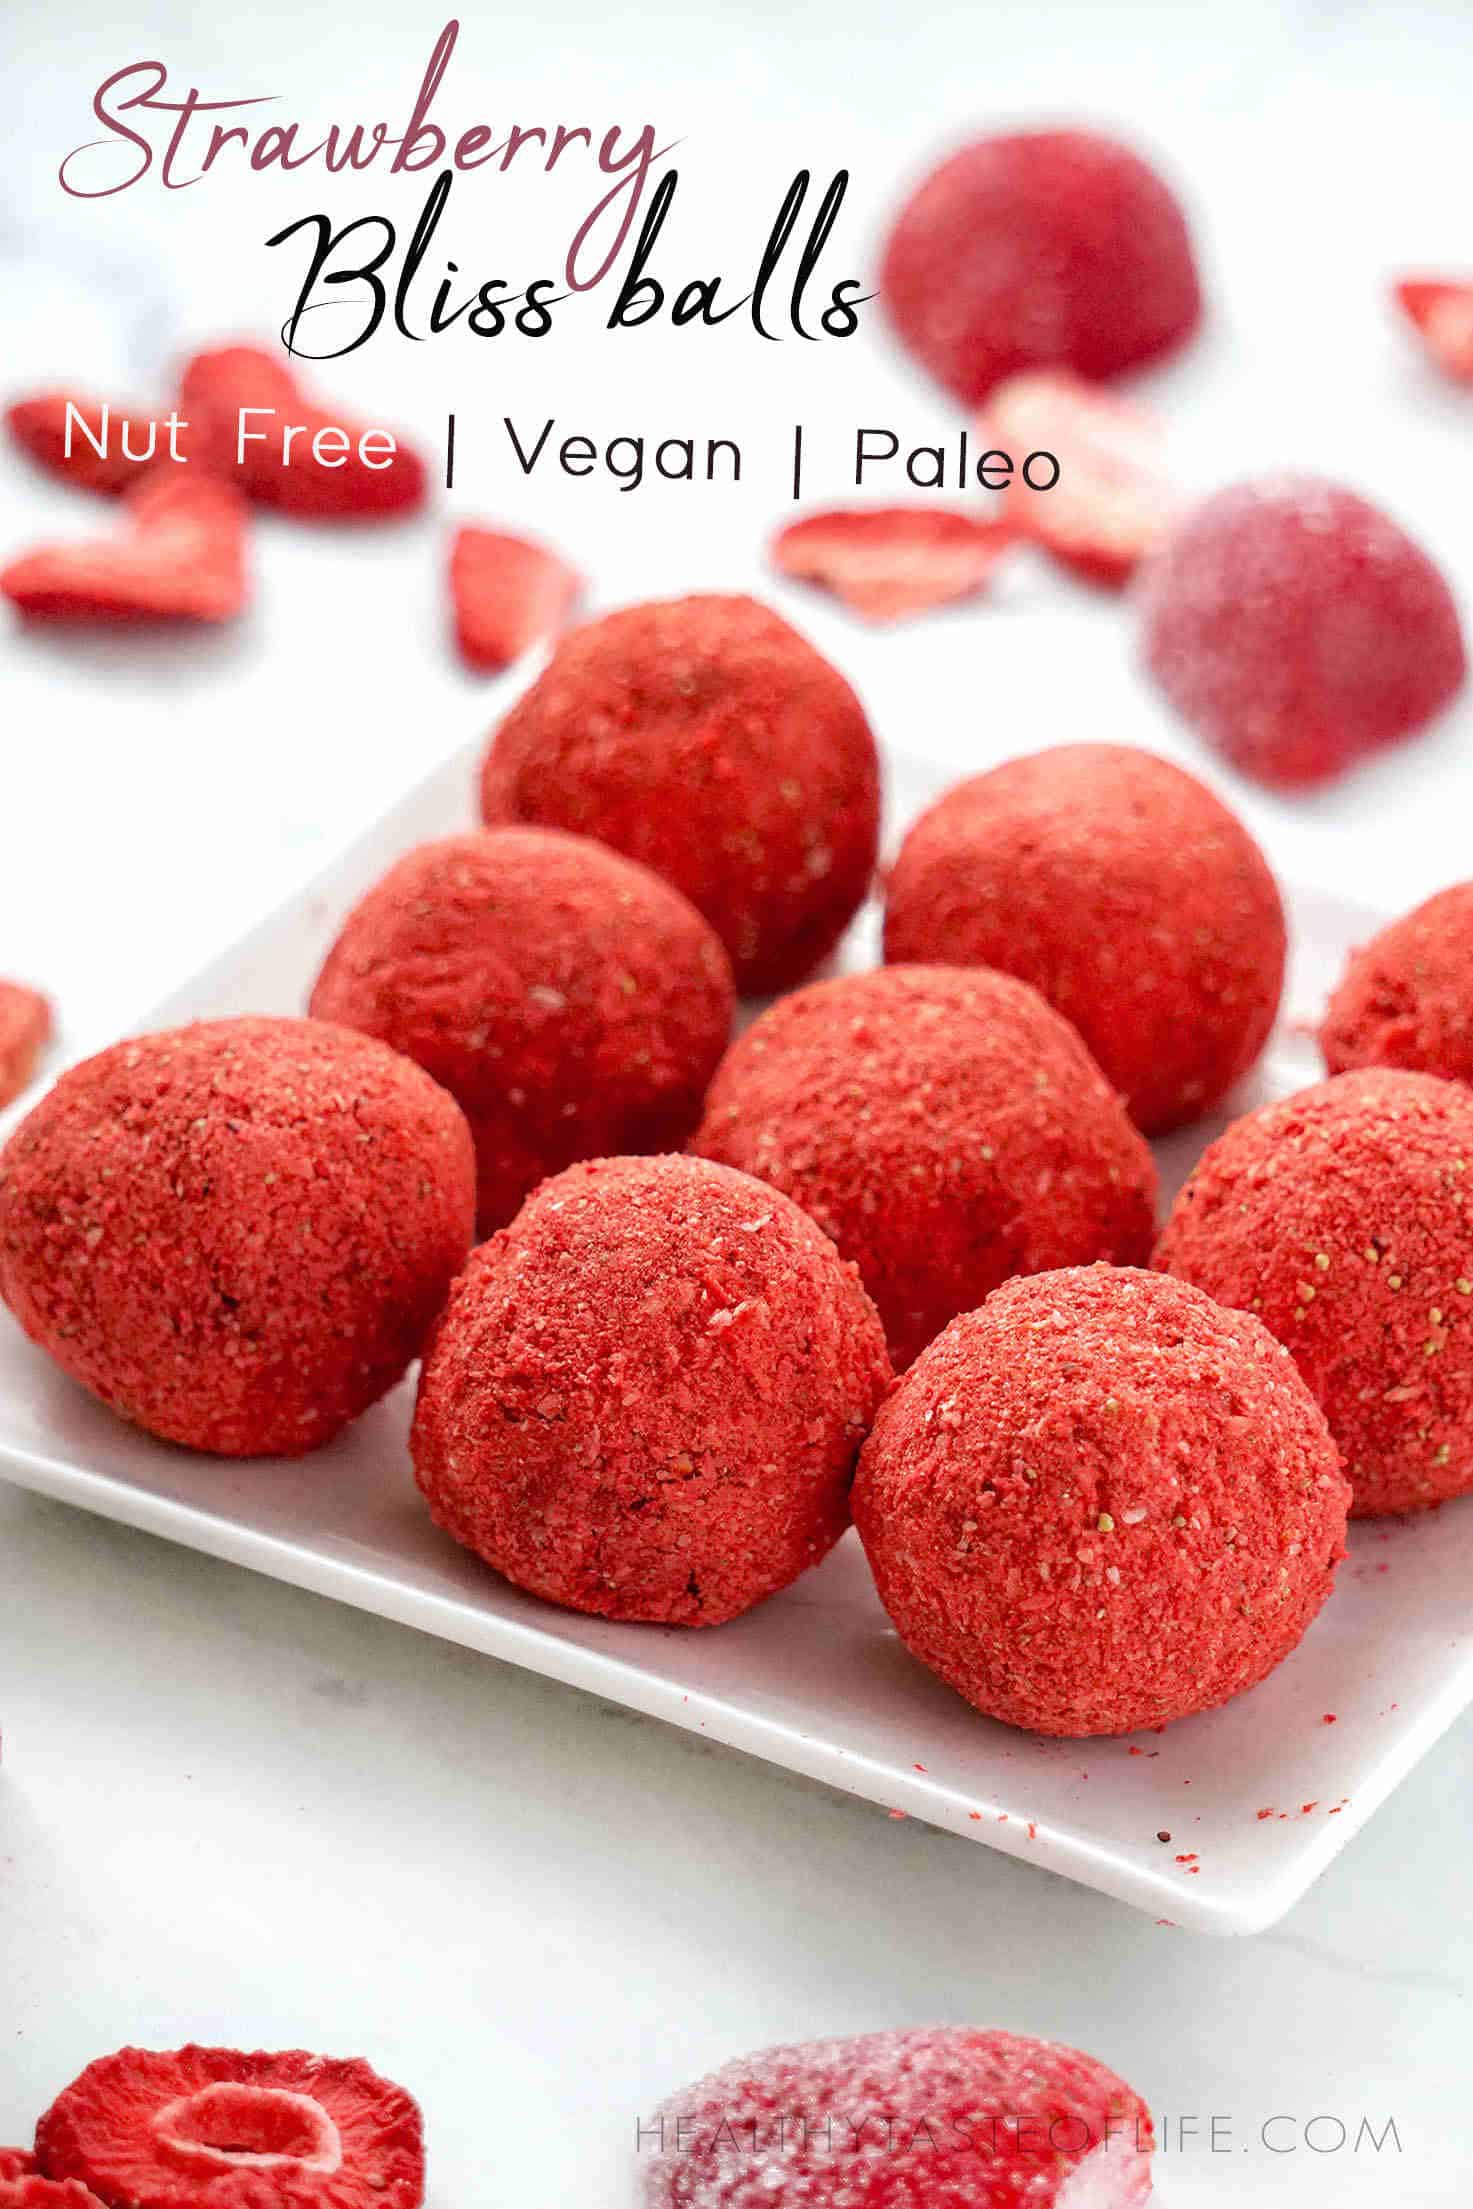 Healthy Strawberry bliss balls - nut free, gluten free, vegan - full of fiber, healthy fats, protein and strawberry flavor! These healthy strawberry bliss balls are the perfect no bake, raw vegan, paleo snack or breakfast you can have on the go. The recipe for these nut free, gluten free and sugar free strawberry bliss balls is easy to make and is “clean eating” friendly.